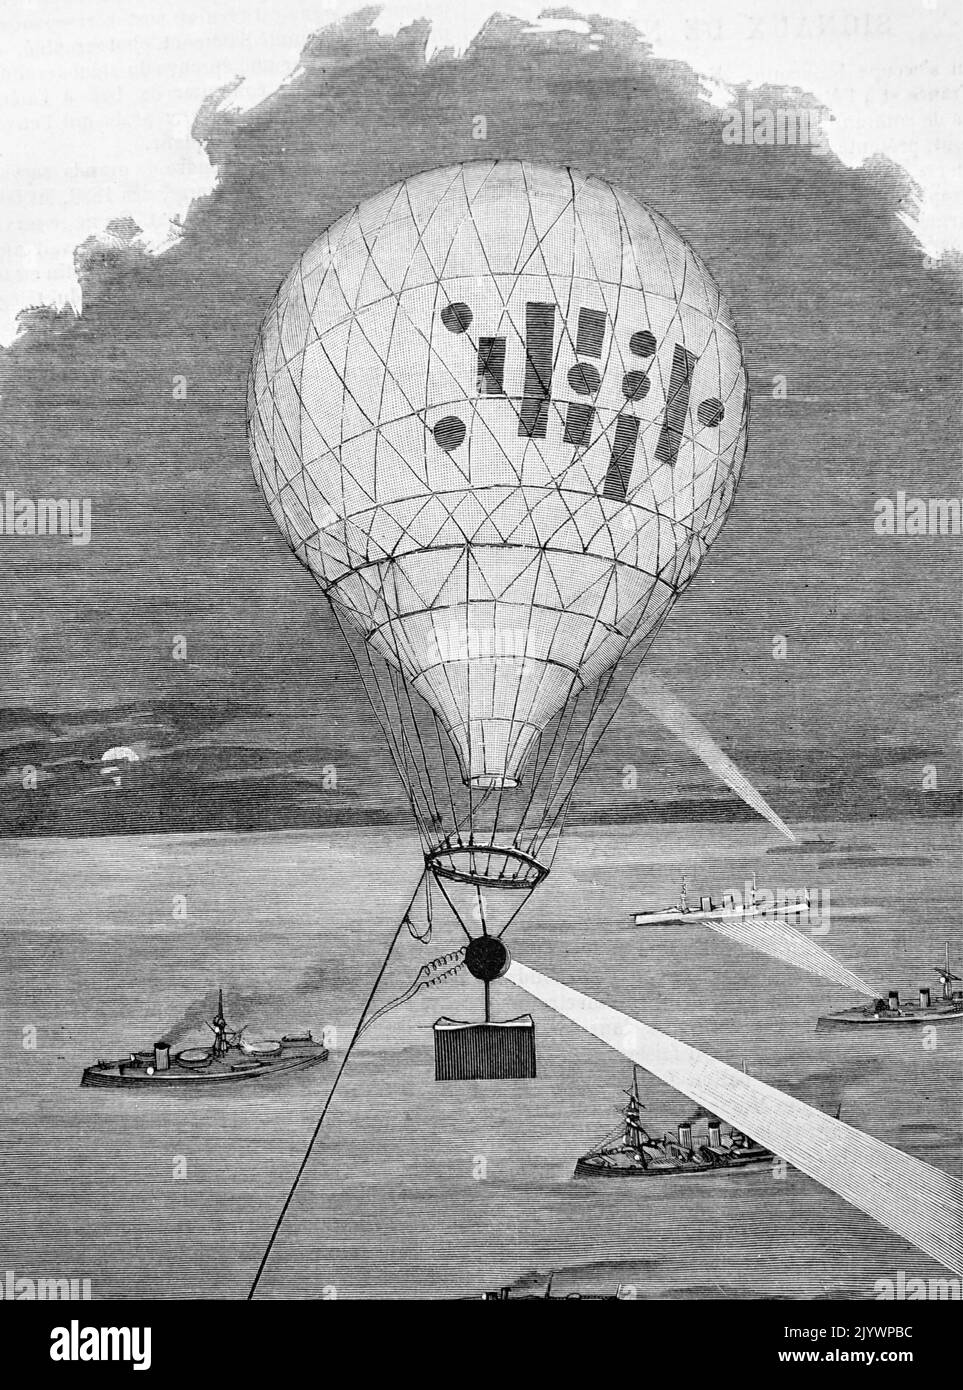 Illustration depicting a hot-air balloon assisting in the search of a man lost at sea by shinning a huge light into the night sky. Dated 19th Century Stock Photo